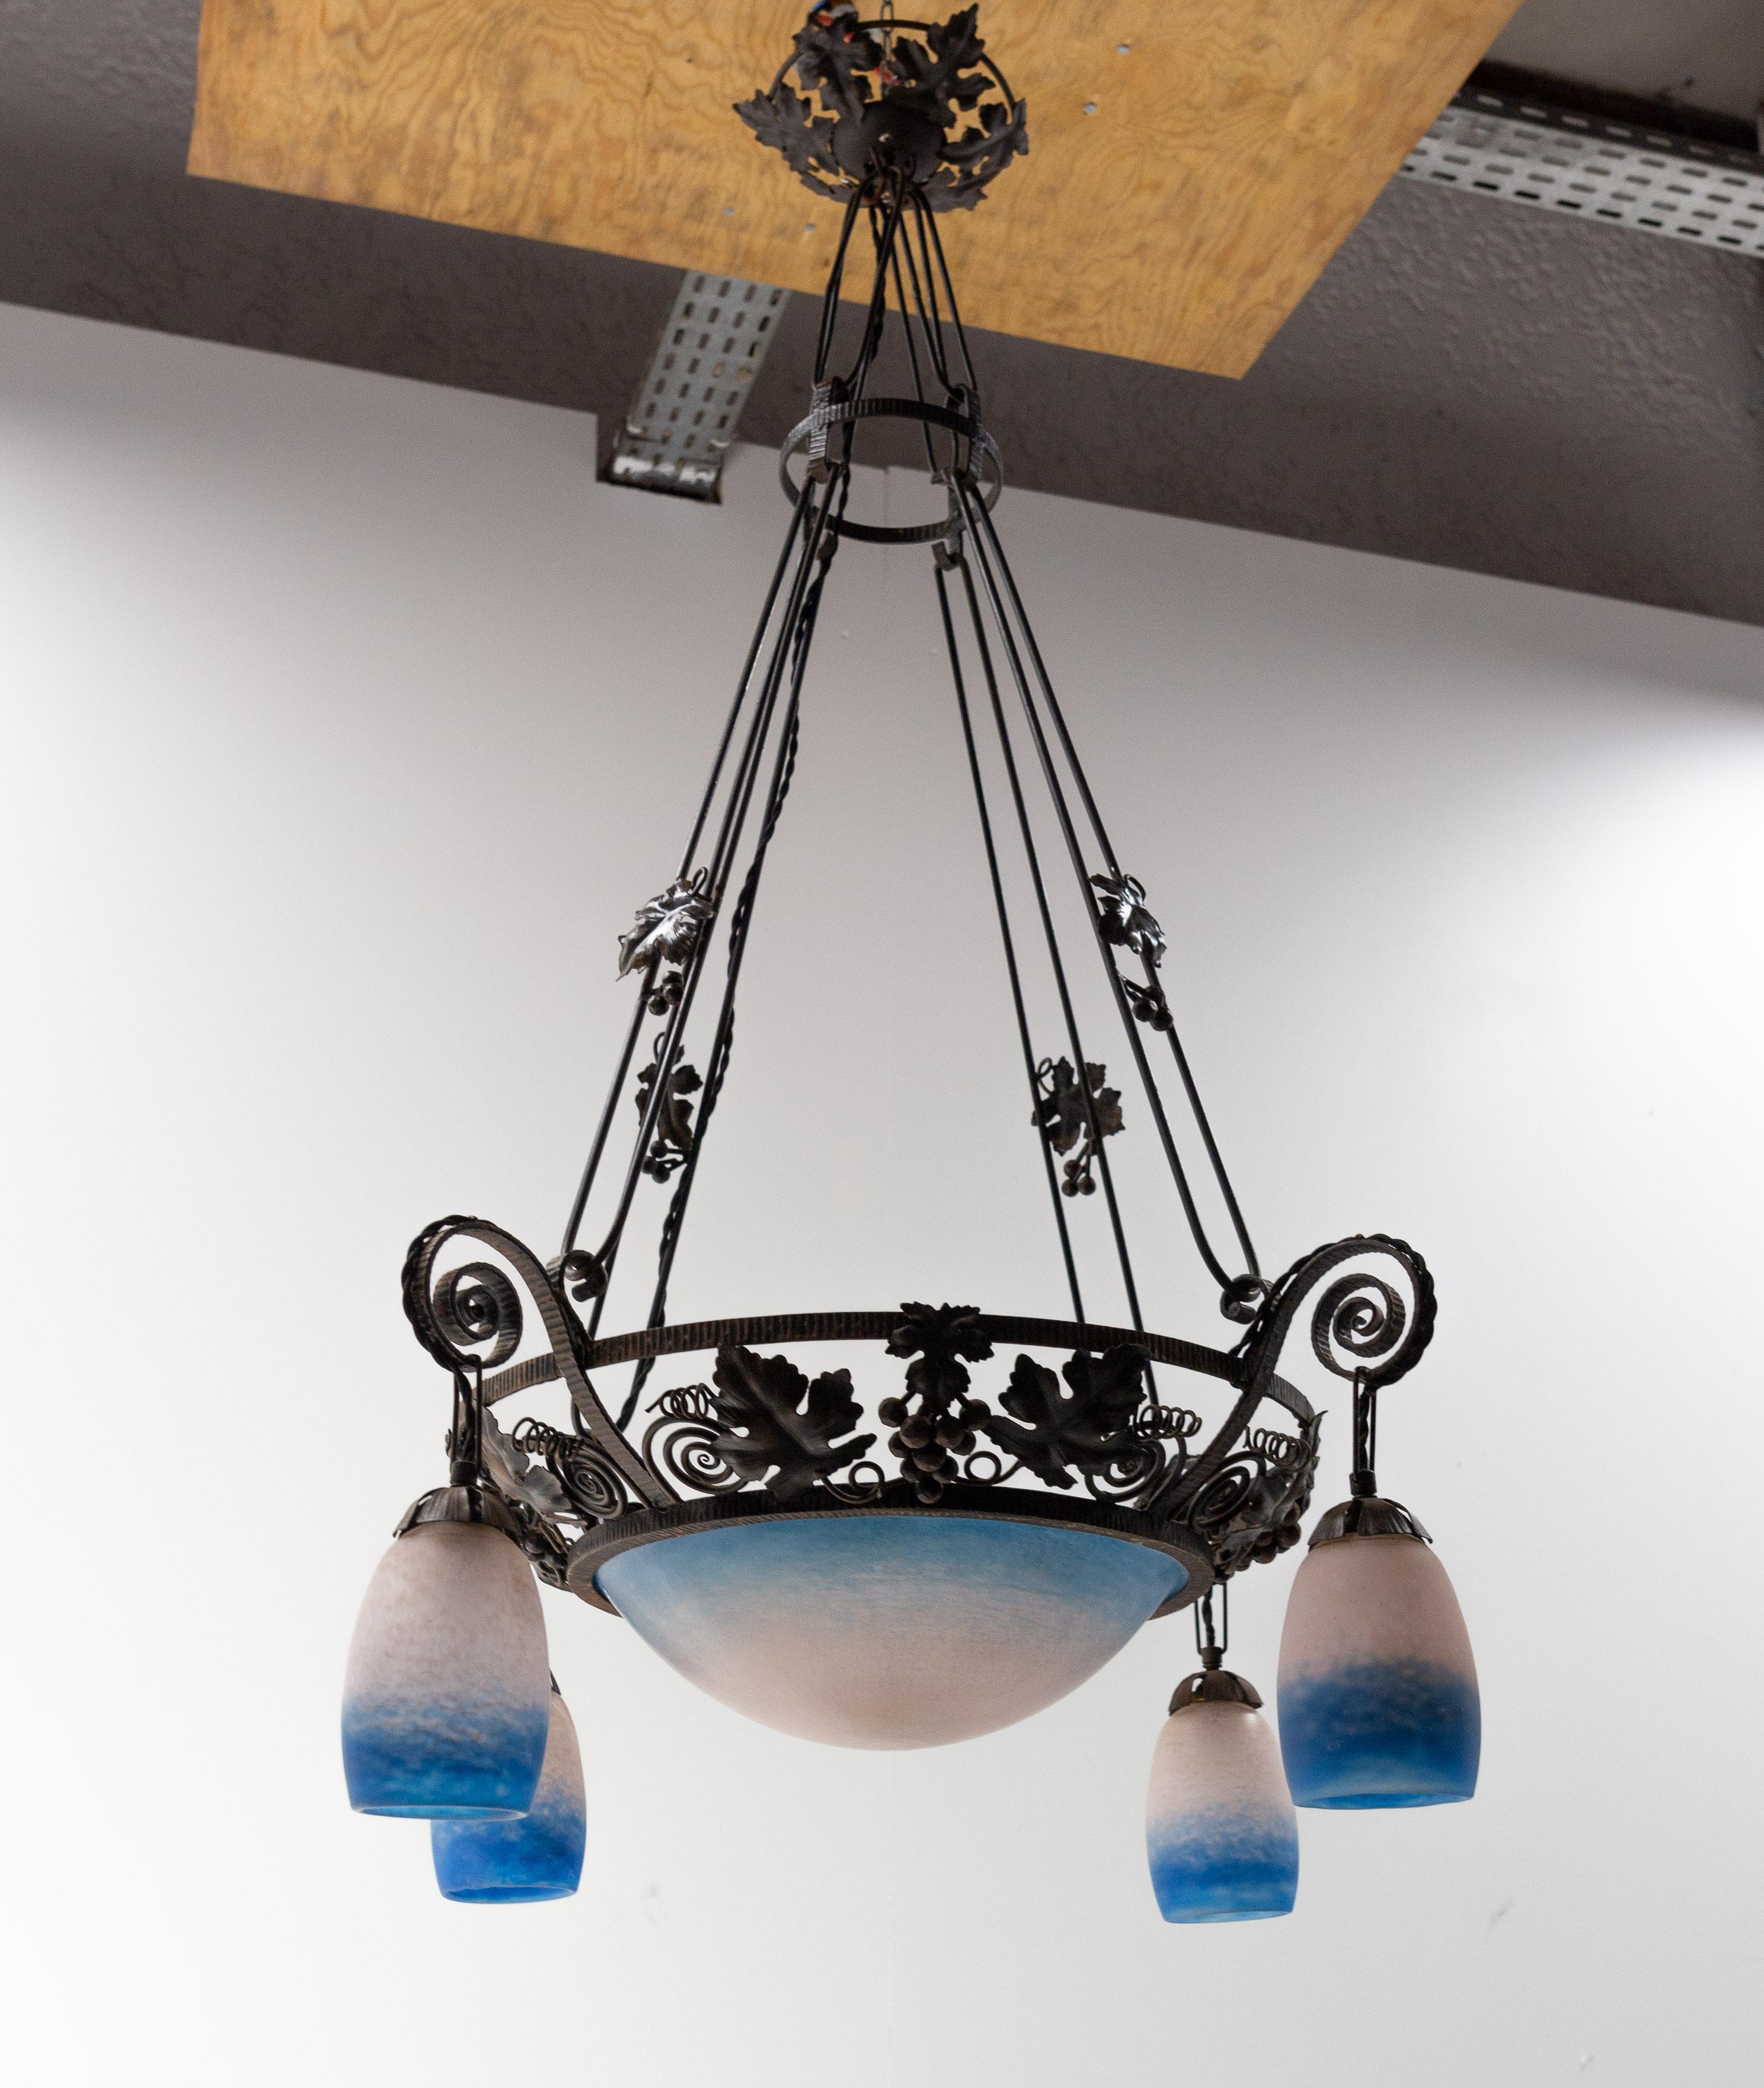 Art Deco chandelier or lustre, French
Molten glass and wrought iron ceiling pendant decorated of grape fruits and vine leaves.
Luminaire made circa 1930 during the art déco years. The glass tulips were made in the glass factory of Rethondes. This